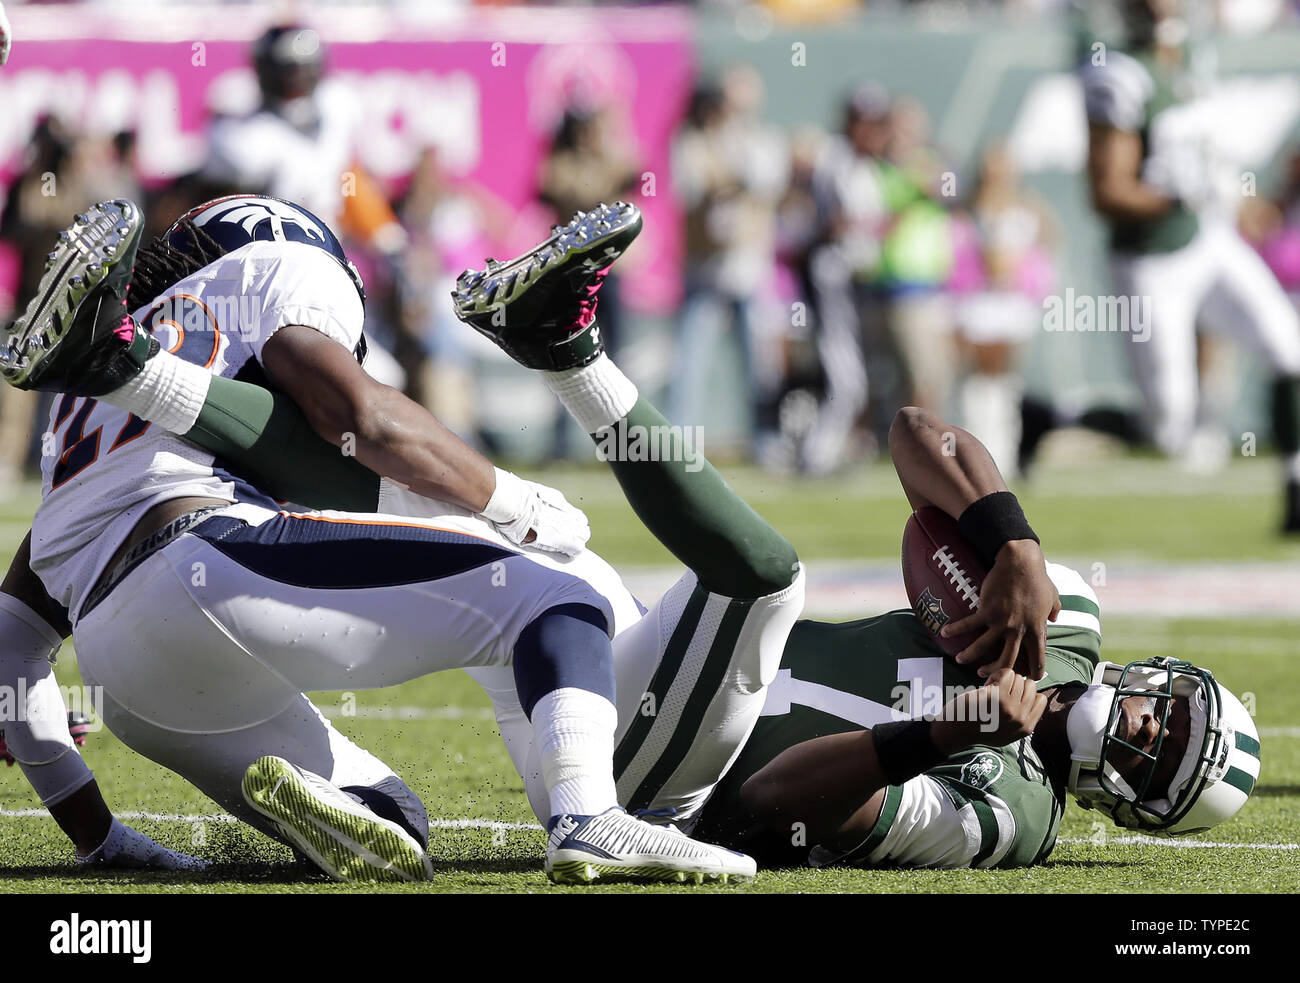 Denver Broncos Bradley Roby sacks New York Jets Geno Smith for a 3 yard loss in the third quarter in week 6 of the NFL season at MetLife Stadium in East Rutherford, New Jersey on October 12, 2014. The Broncos defeated the Jets 31-17.     UPI /John Angelillo Stock Photo